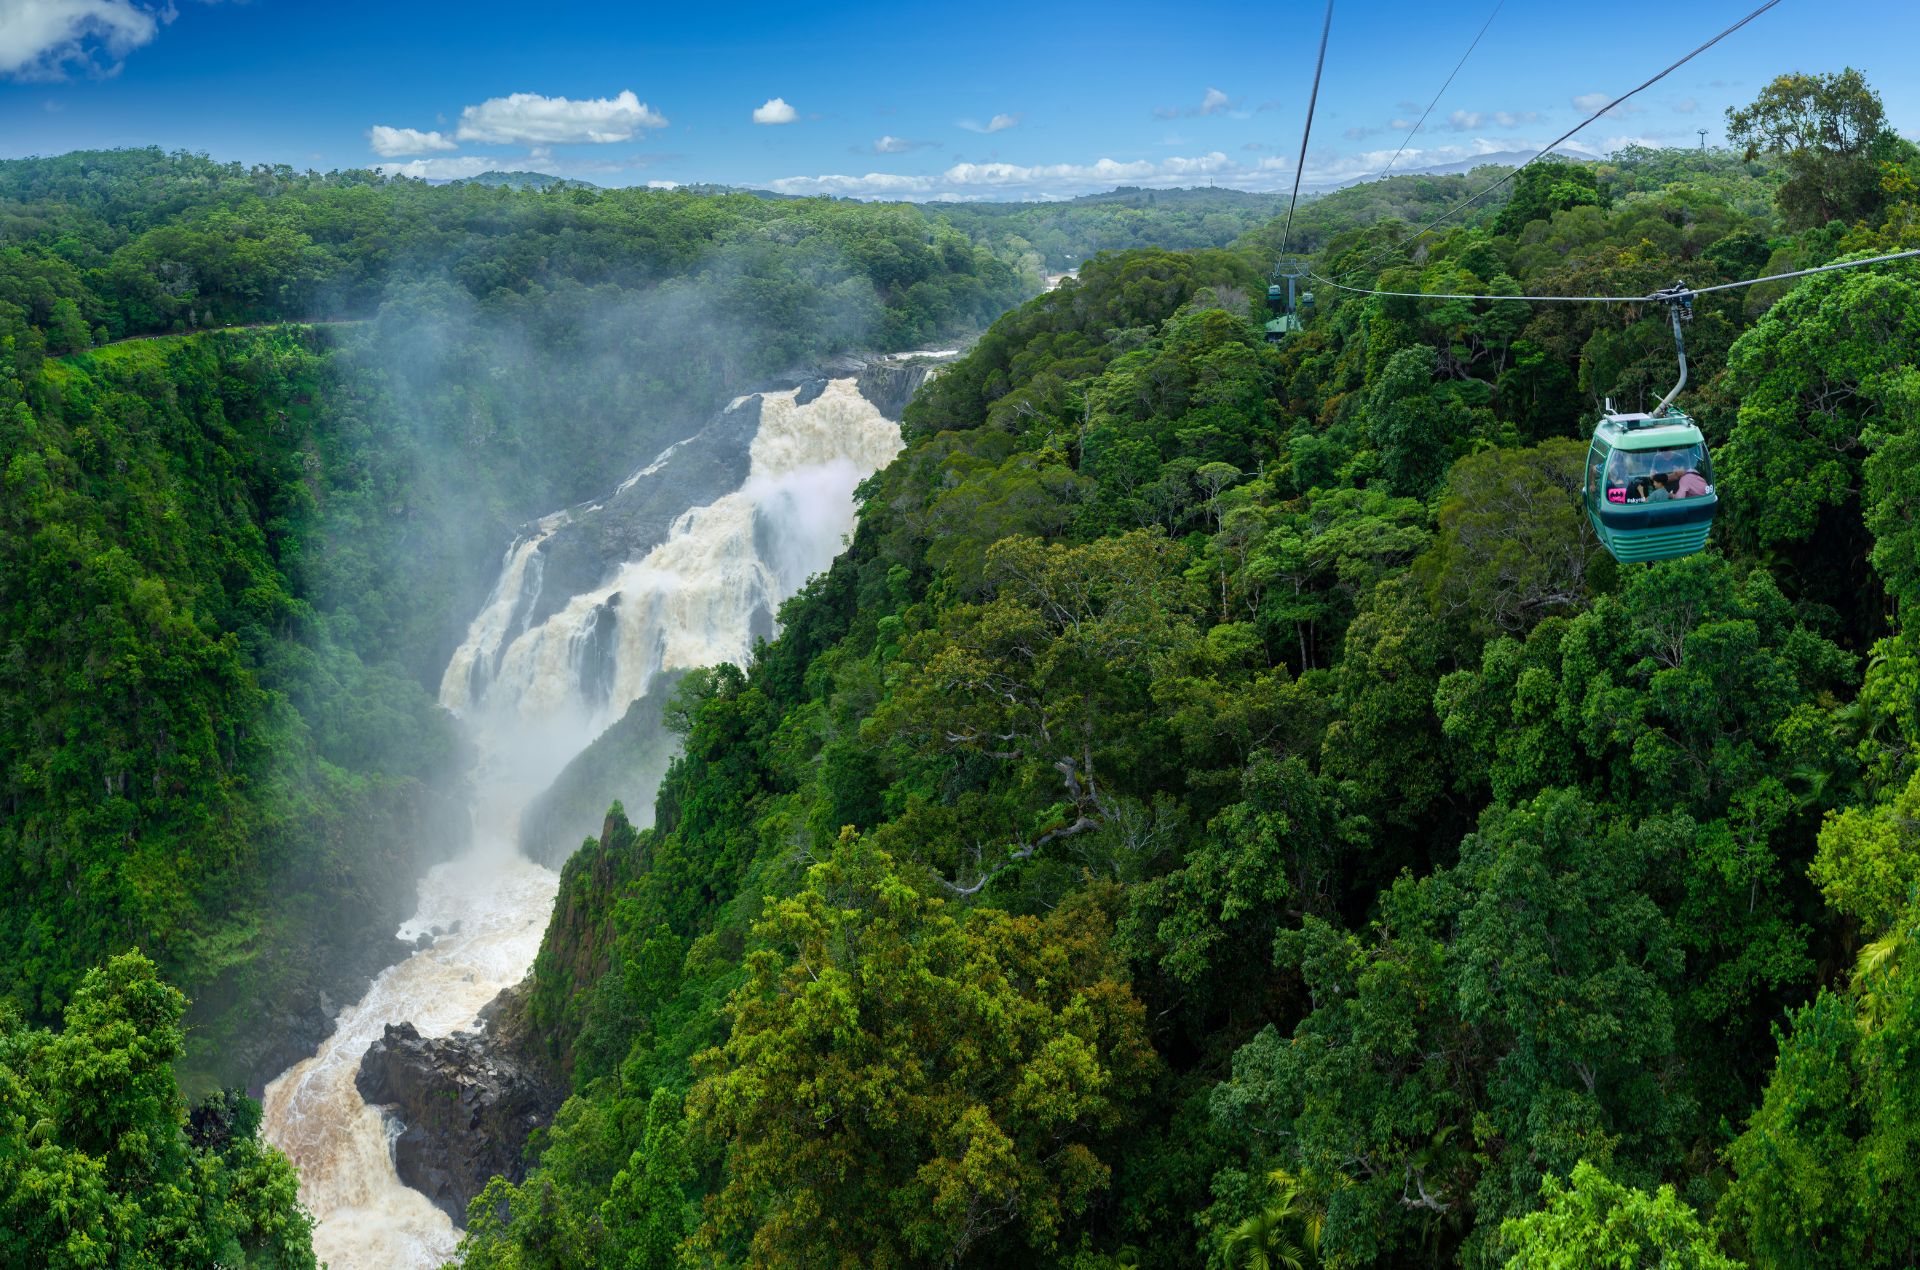 Cable car travelling high over the rainforst canpoy with waterfall in the background